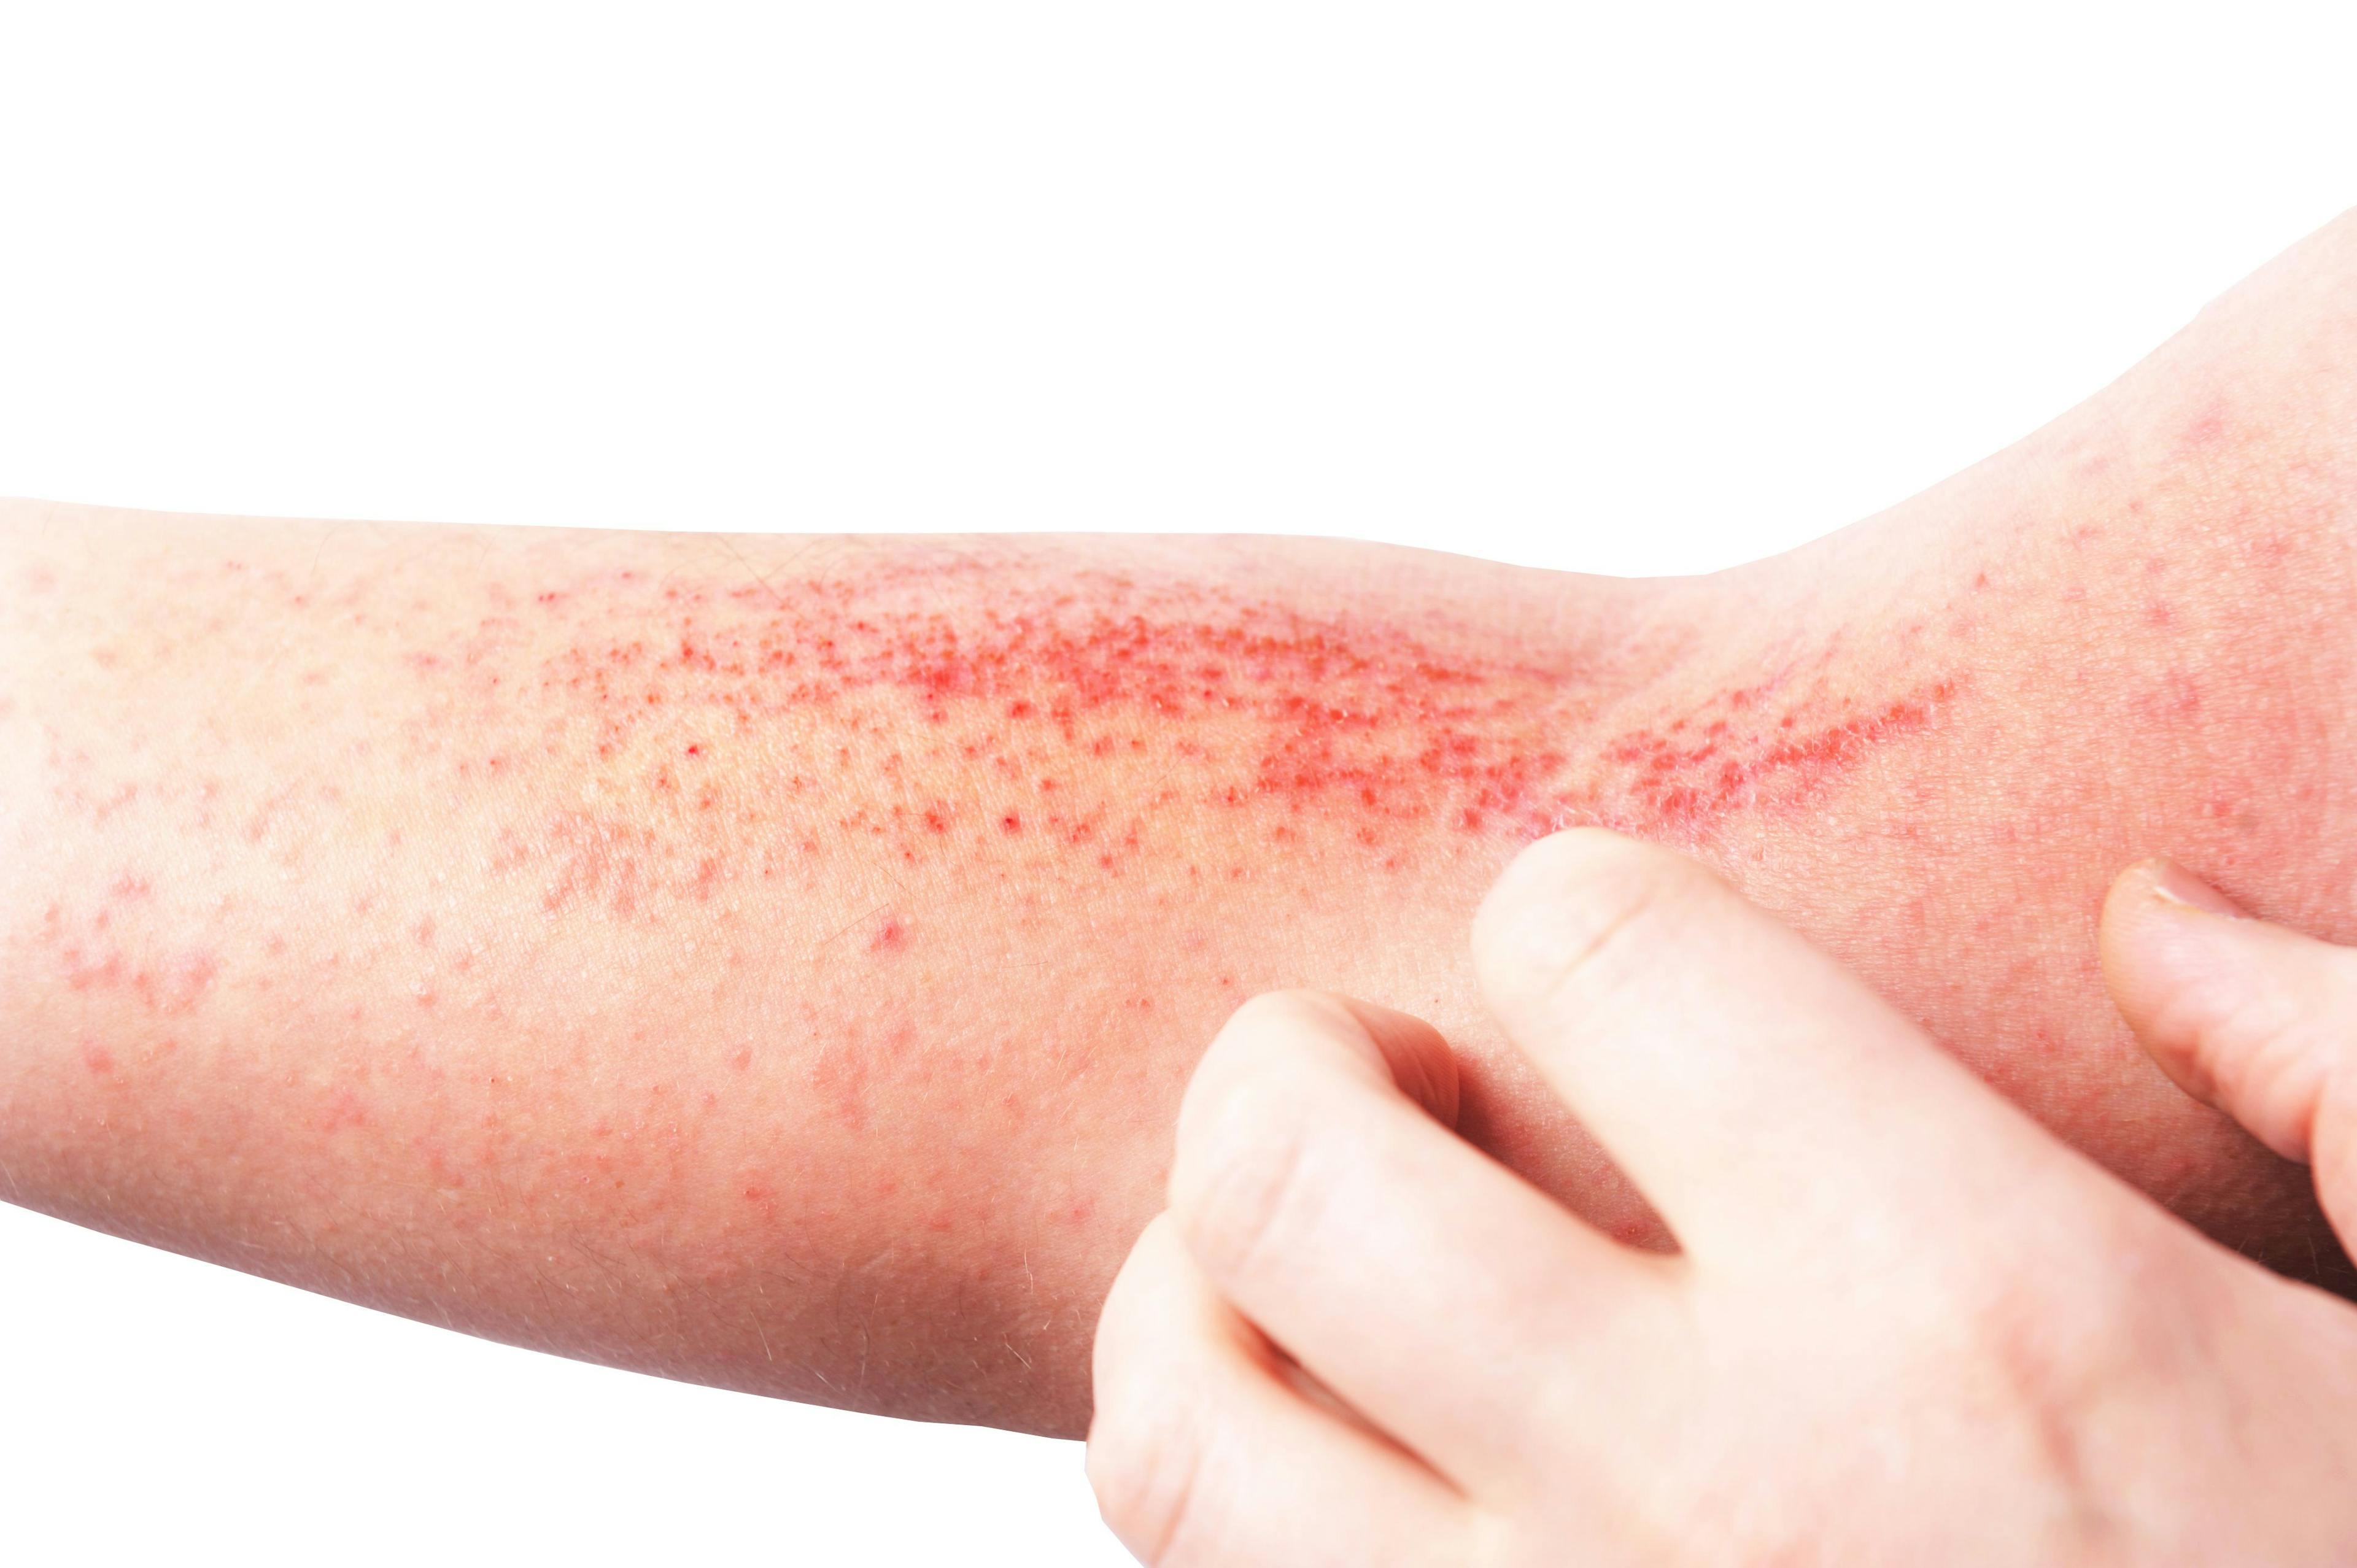 Stigmatization of chronic skin disorders plays role in children's quality of life | Image Credit: © lial88 - © lial88 - stock.adobe.com.